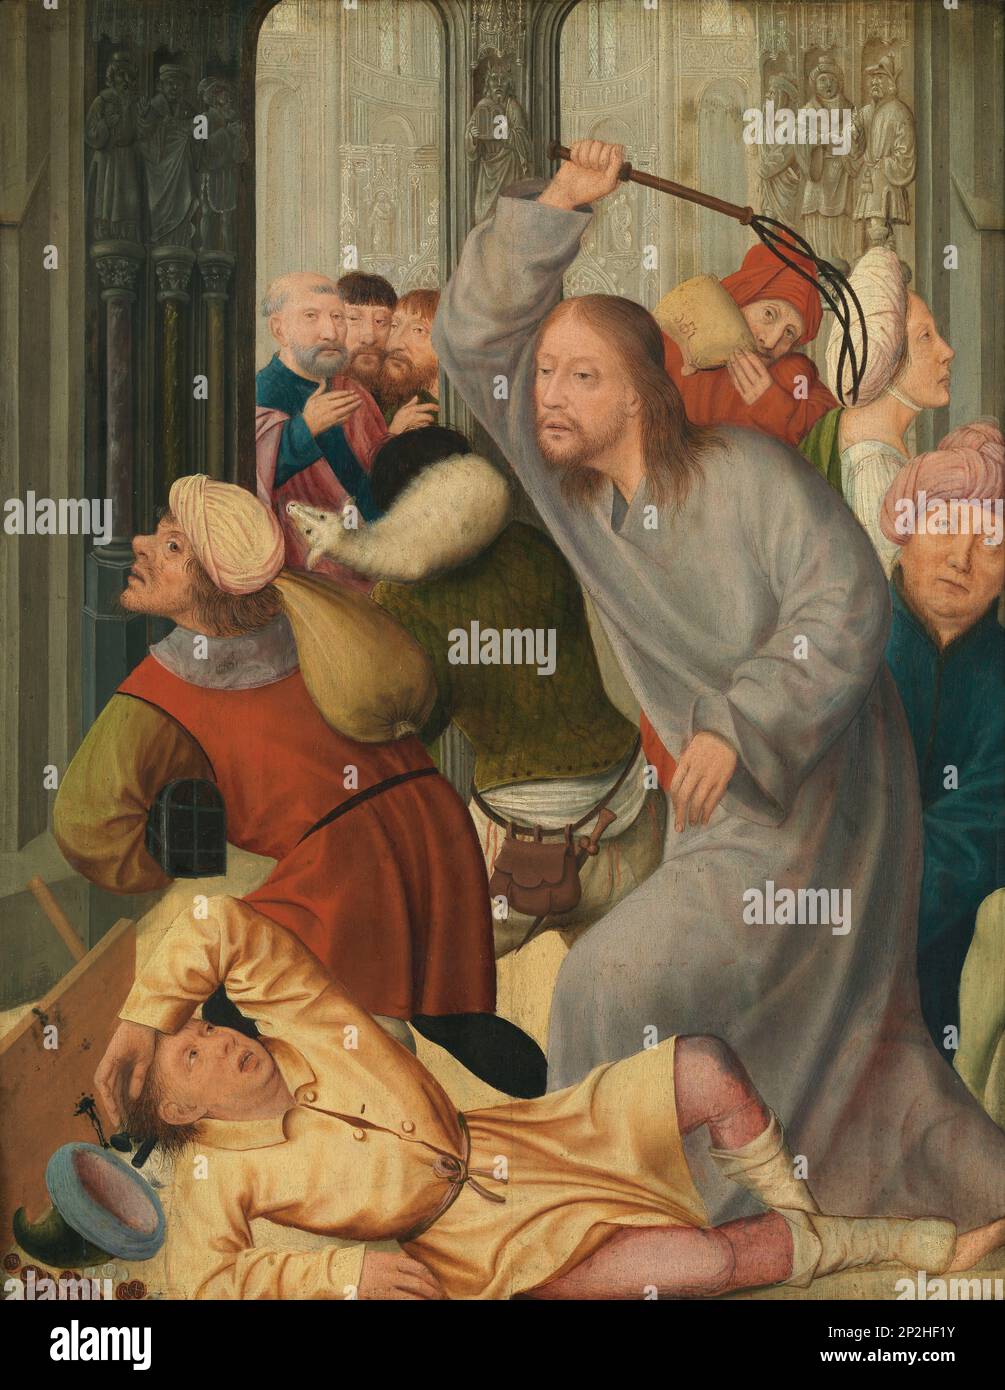 Christ Driving the Money Changers from the Temple. Found in the collection of the Royal Museum of Fine Arts, Antwerp. Stock Photo